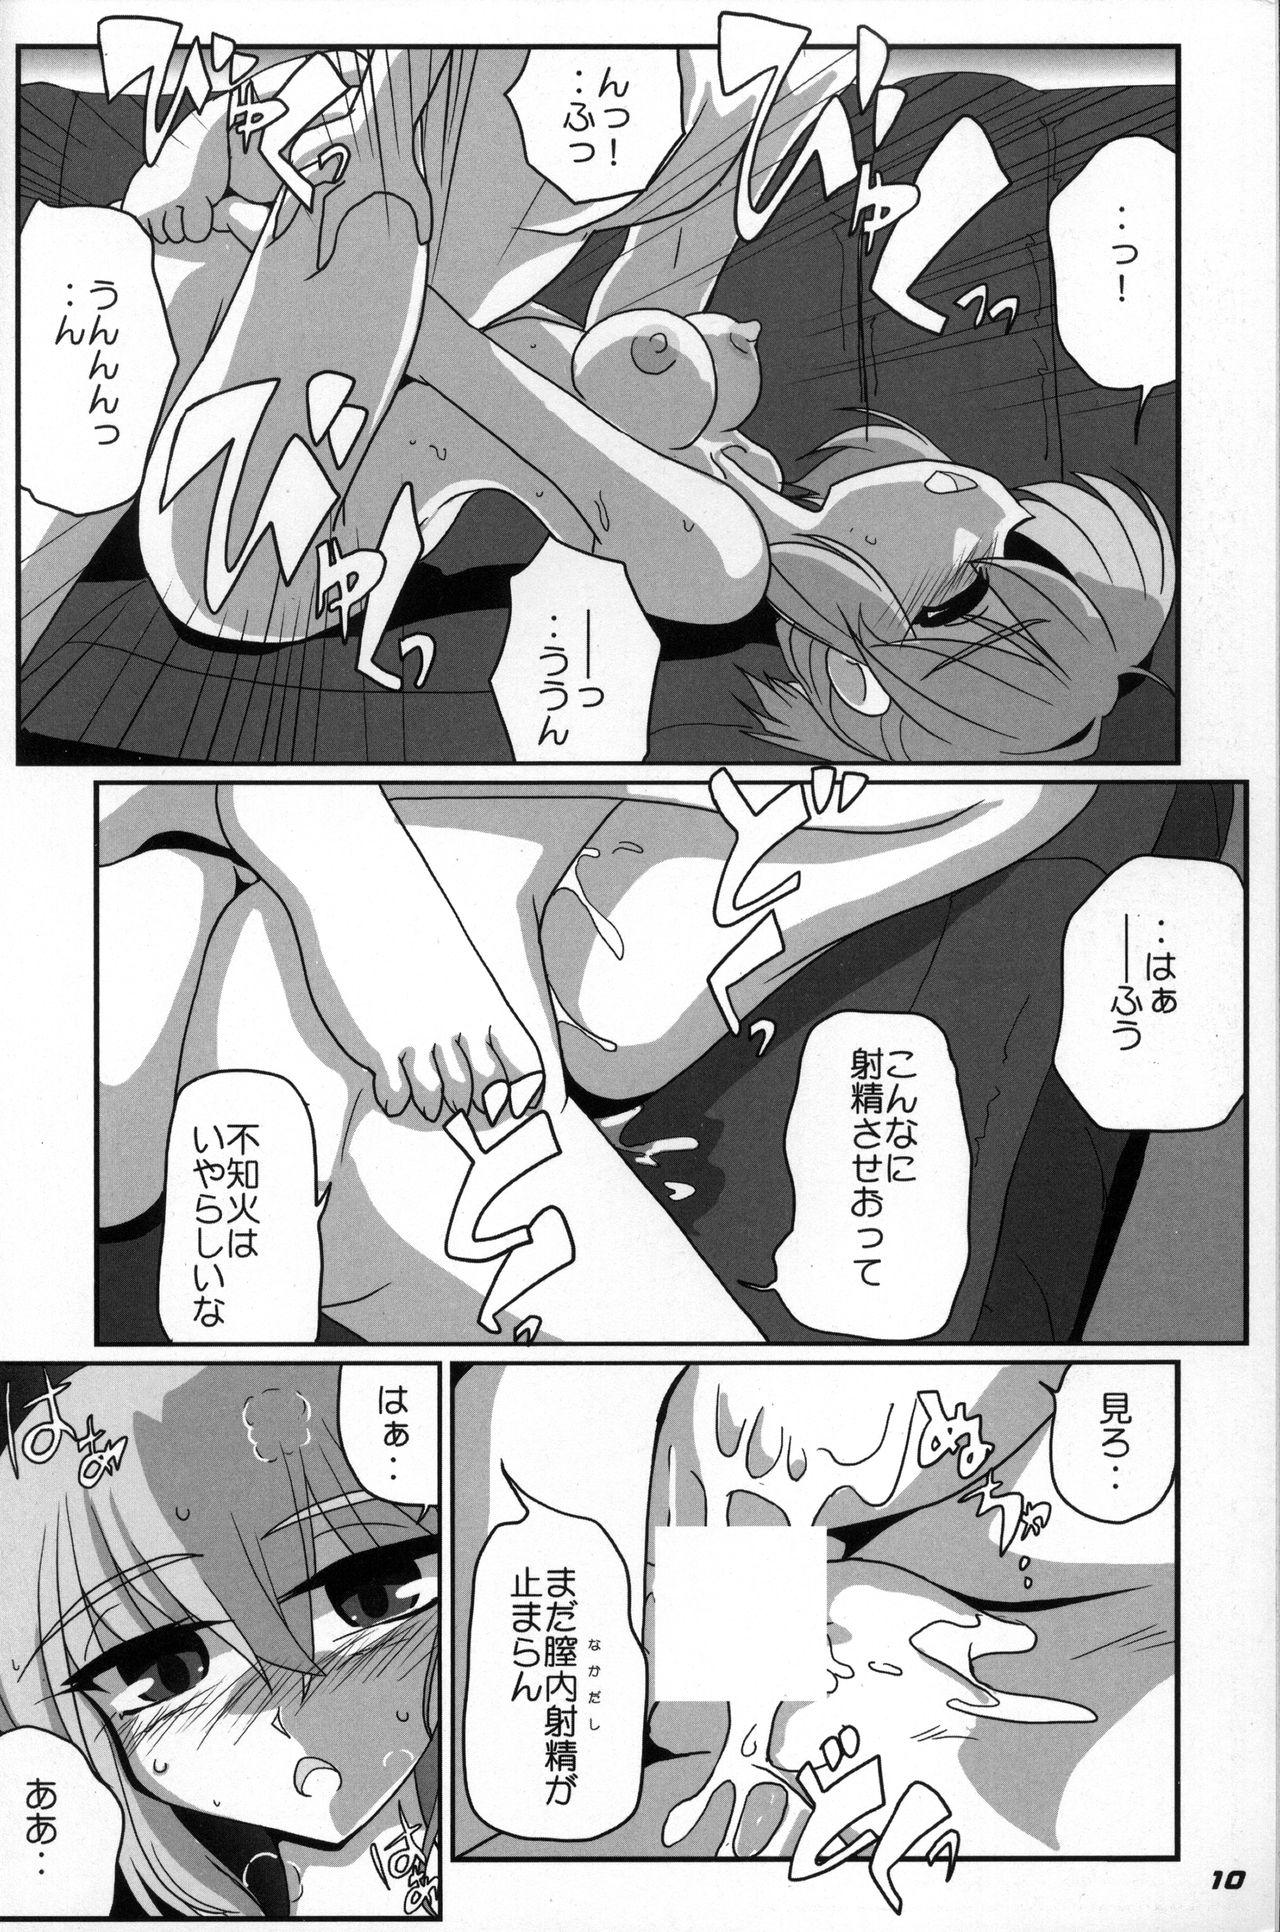 Brazil KAN-COLLE N+ YAGGY kai - Kantai collection Cumload - Page 11